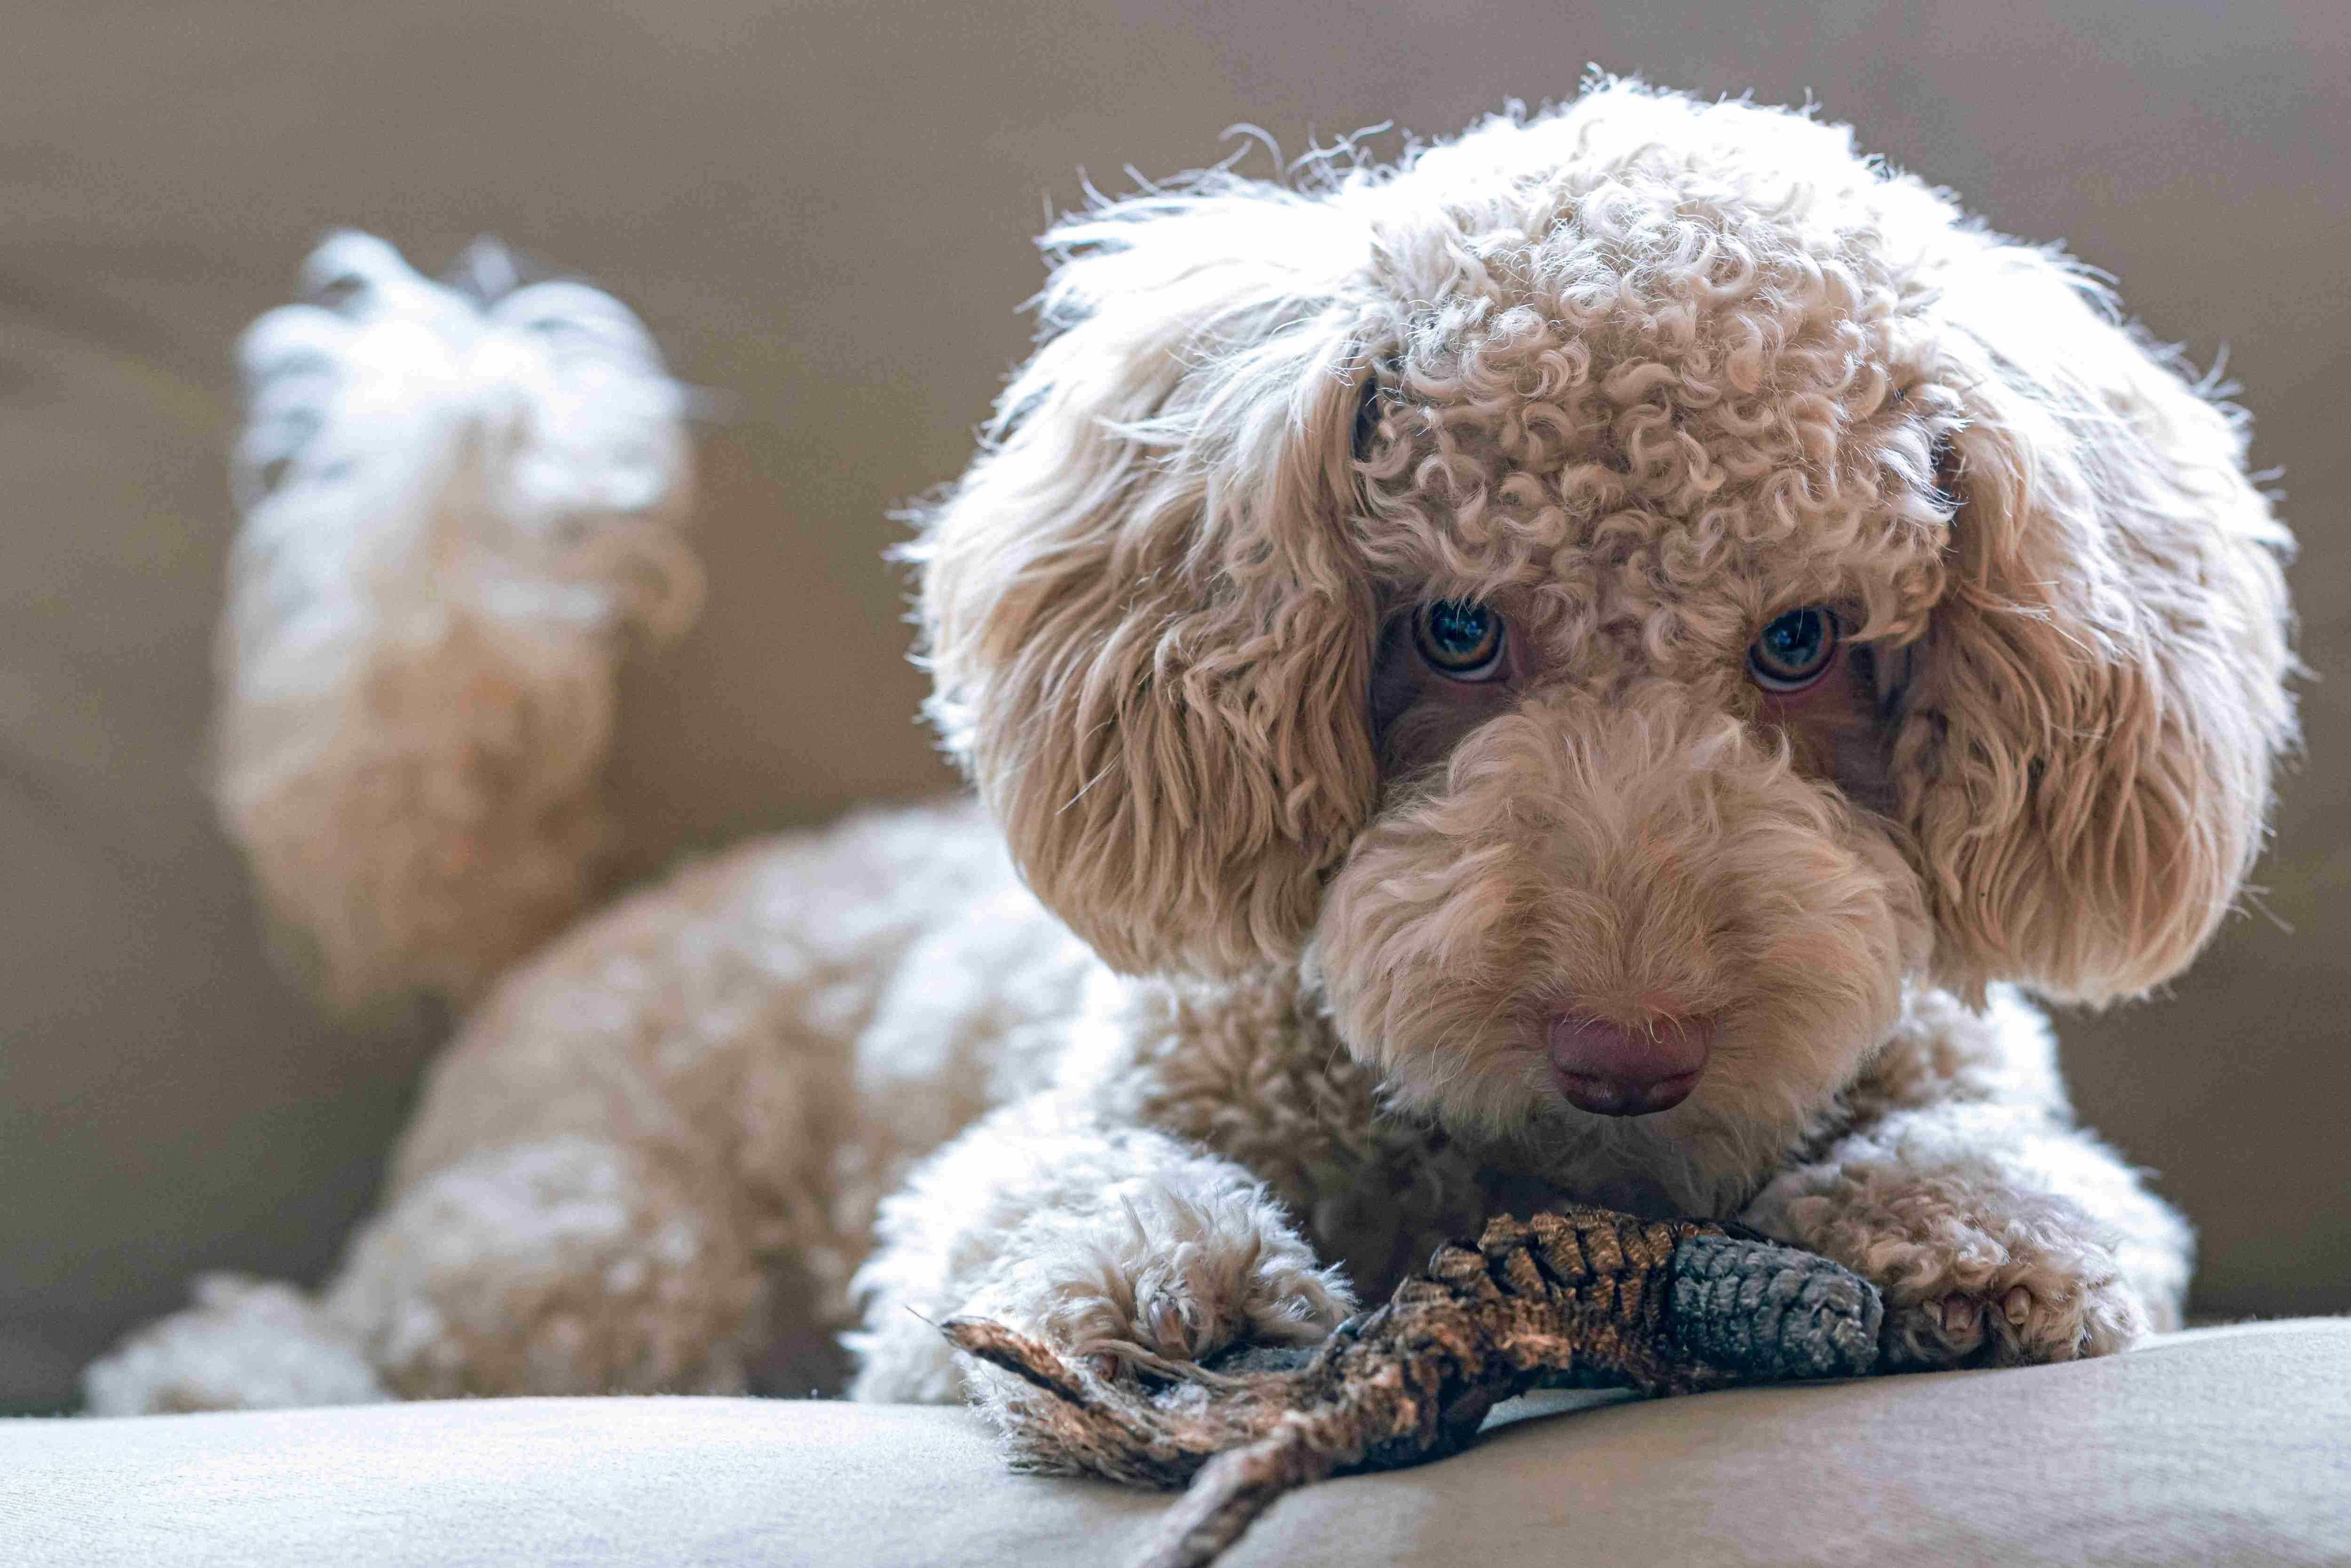 Are there any specific liver conditions that Poodles are prone to?